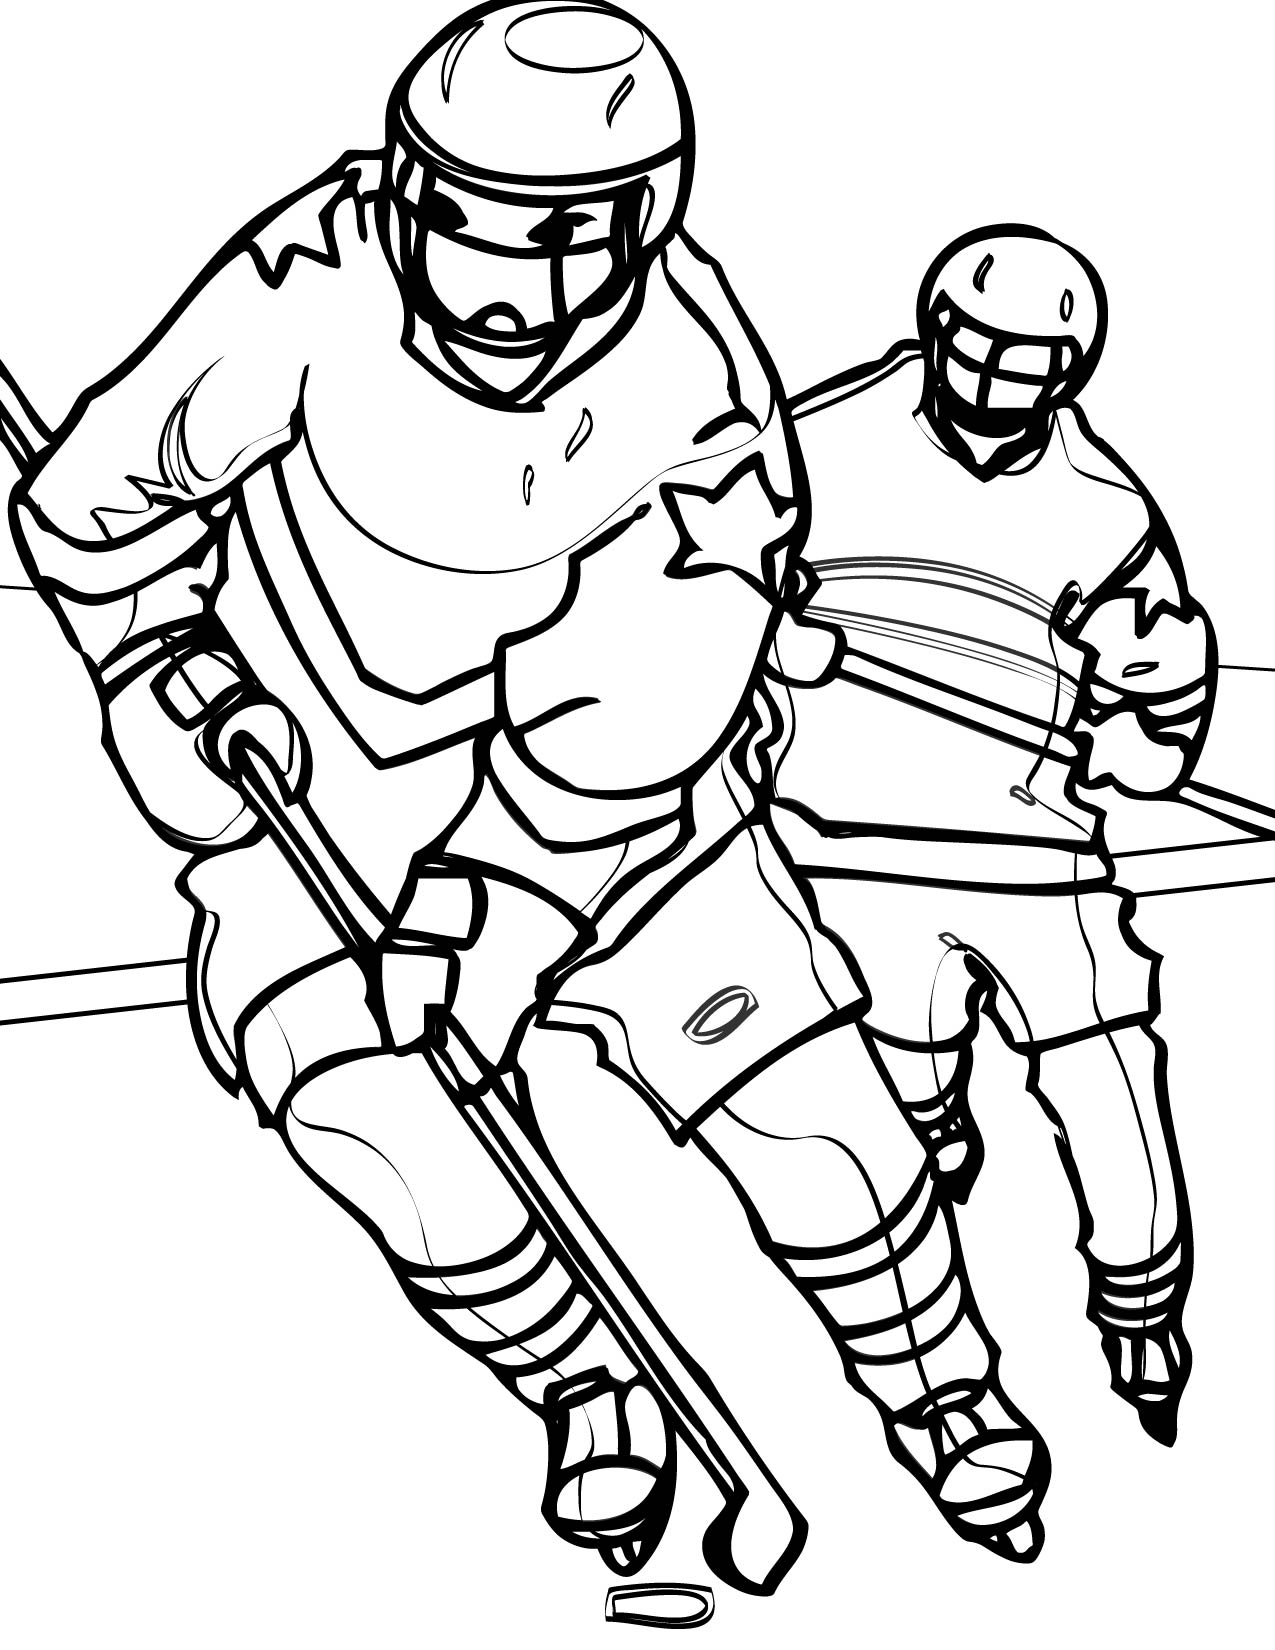 Men Playing Lacrosse Coloring Page - Free Printable Coloring Pages ...